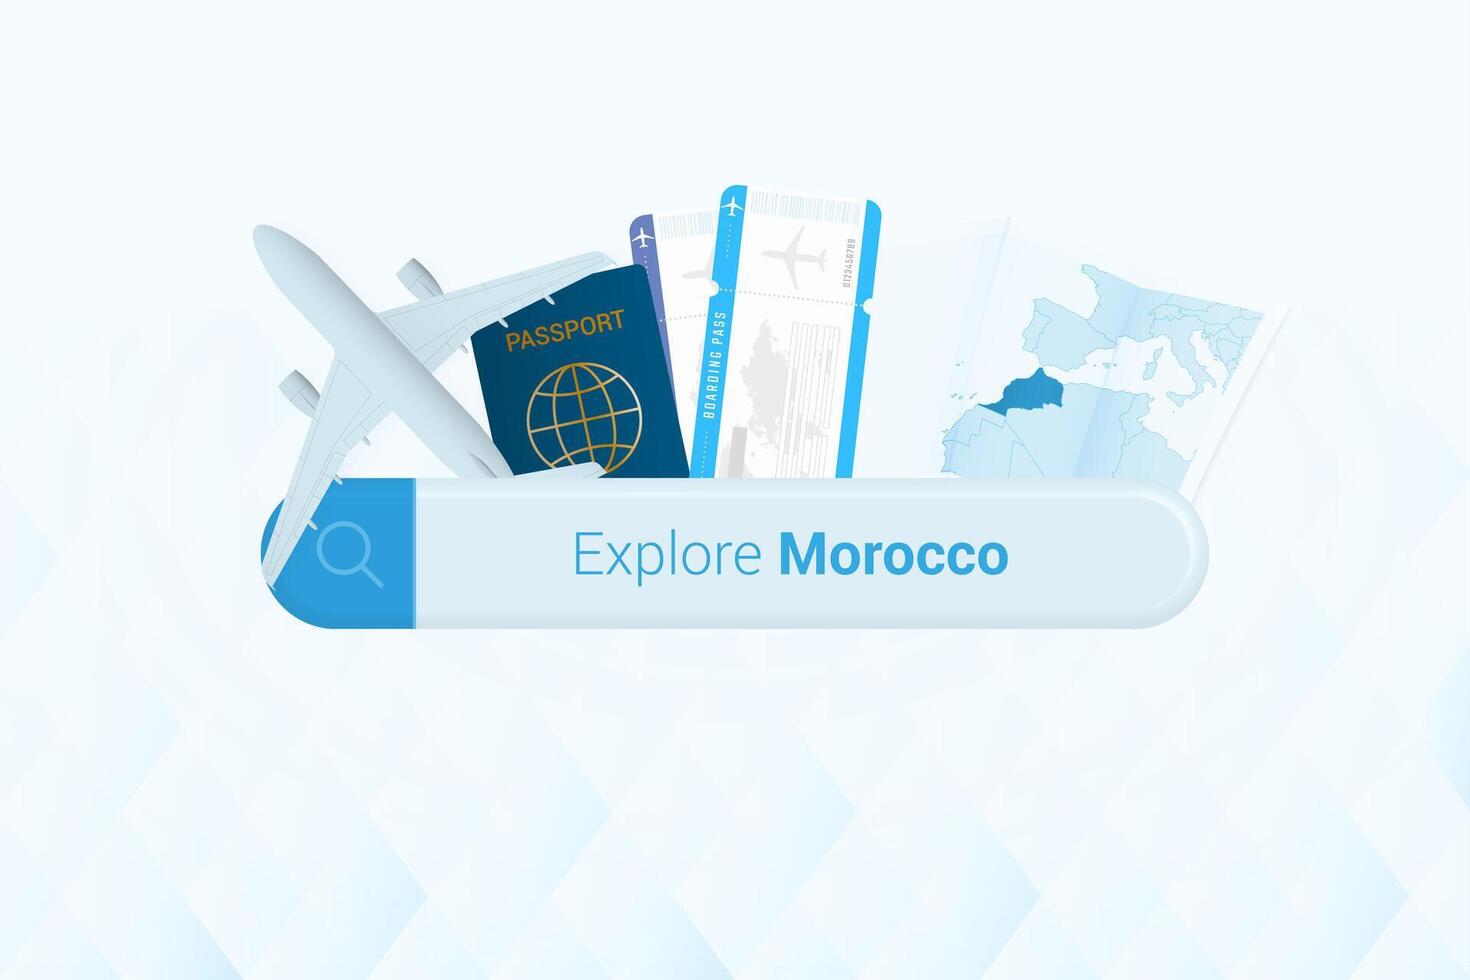 Searching tickets to Morocco or travel destination in Morocco. Searching bar with airplane, passport, boarding pass, tickets and map. vector